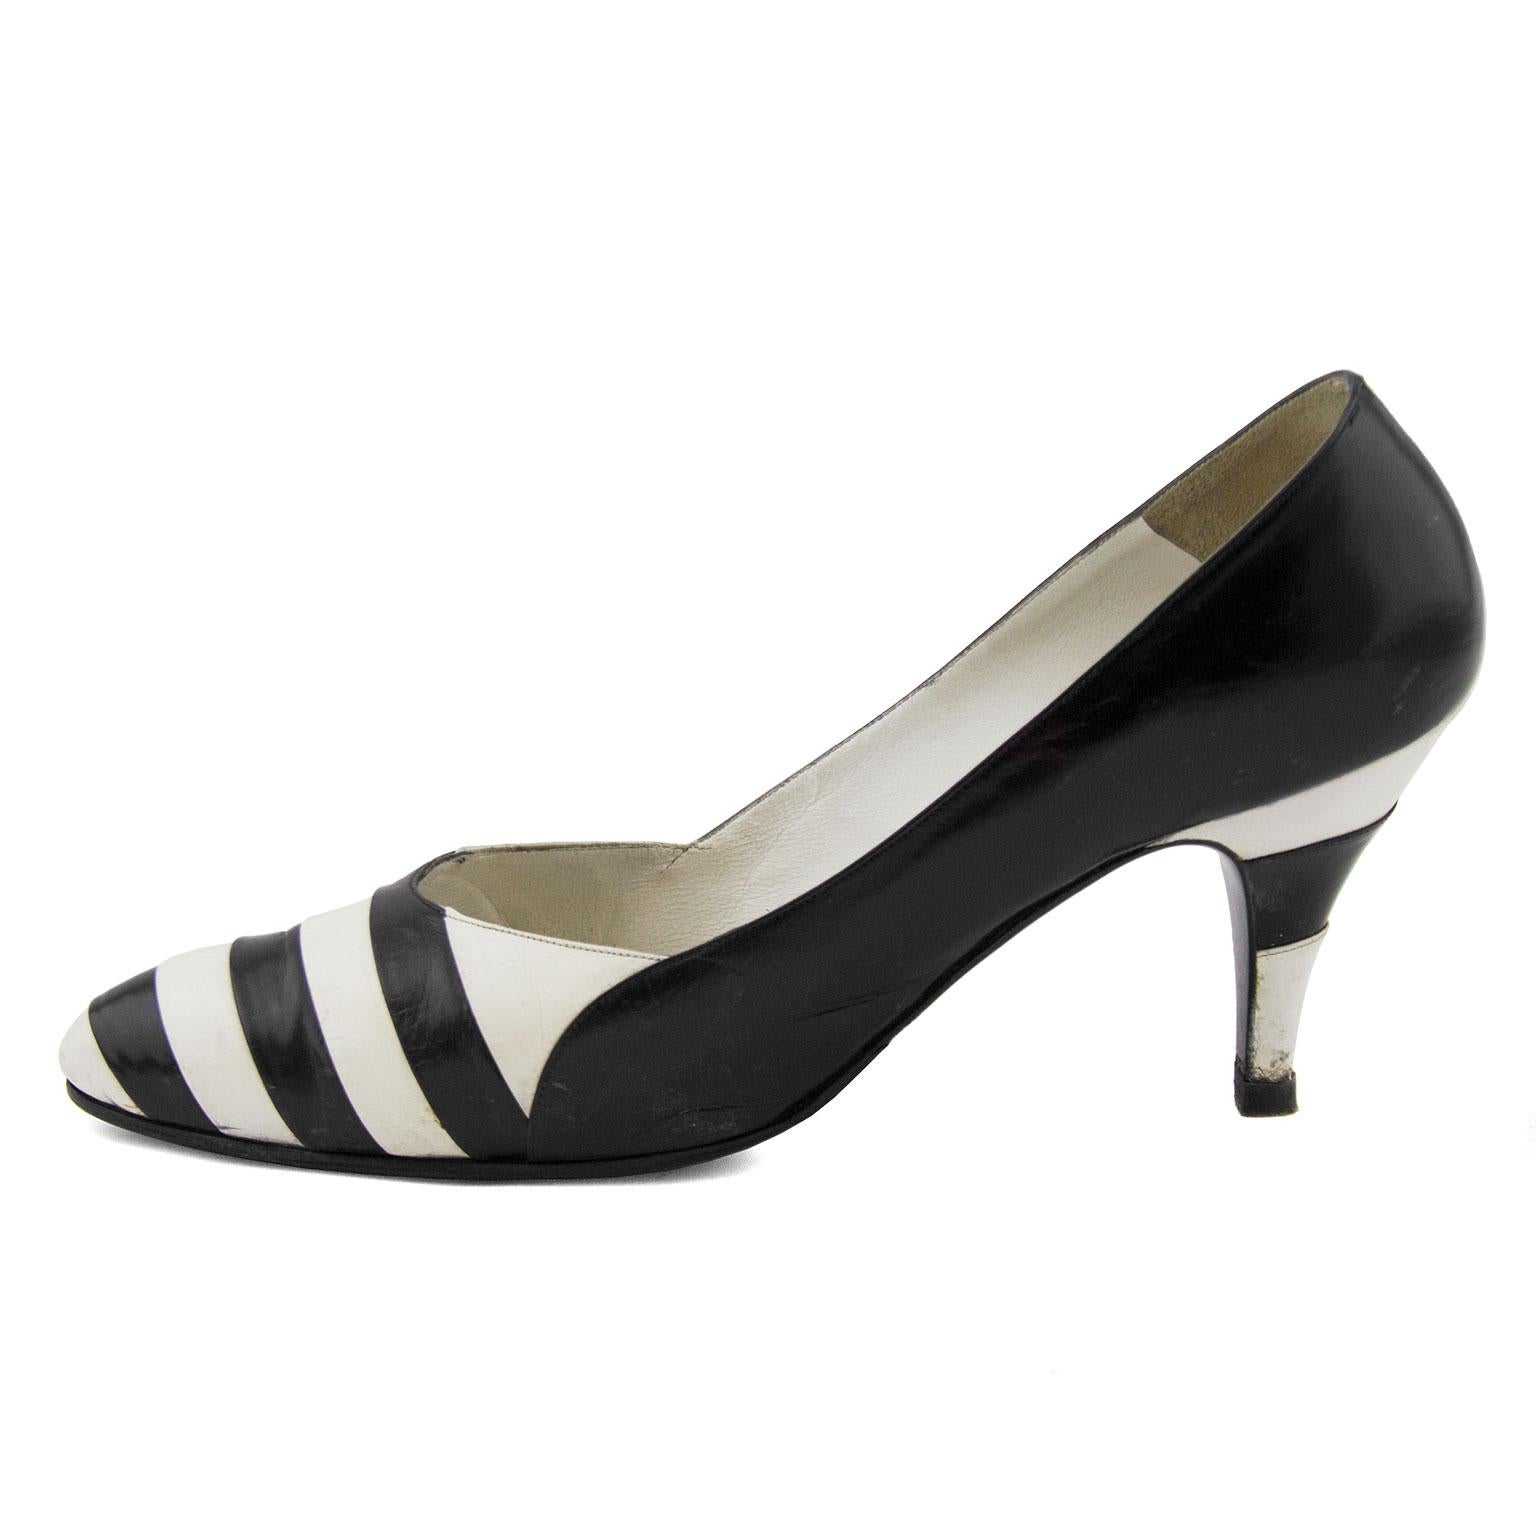 Black and white striped leather pumps from Susan Bennis Warren Edwards. The heel is also covered in black and white leather stripes. In good vintage condition with wear to the toe box where it would naturally crease with wear, and some scuffing on